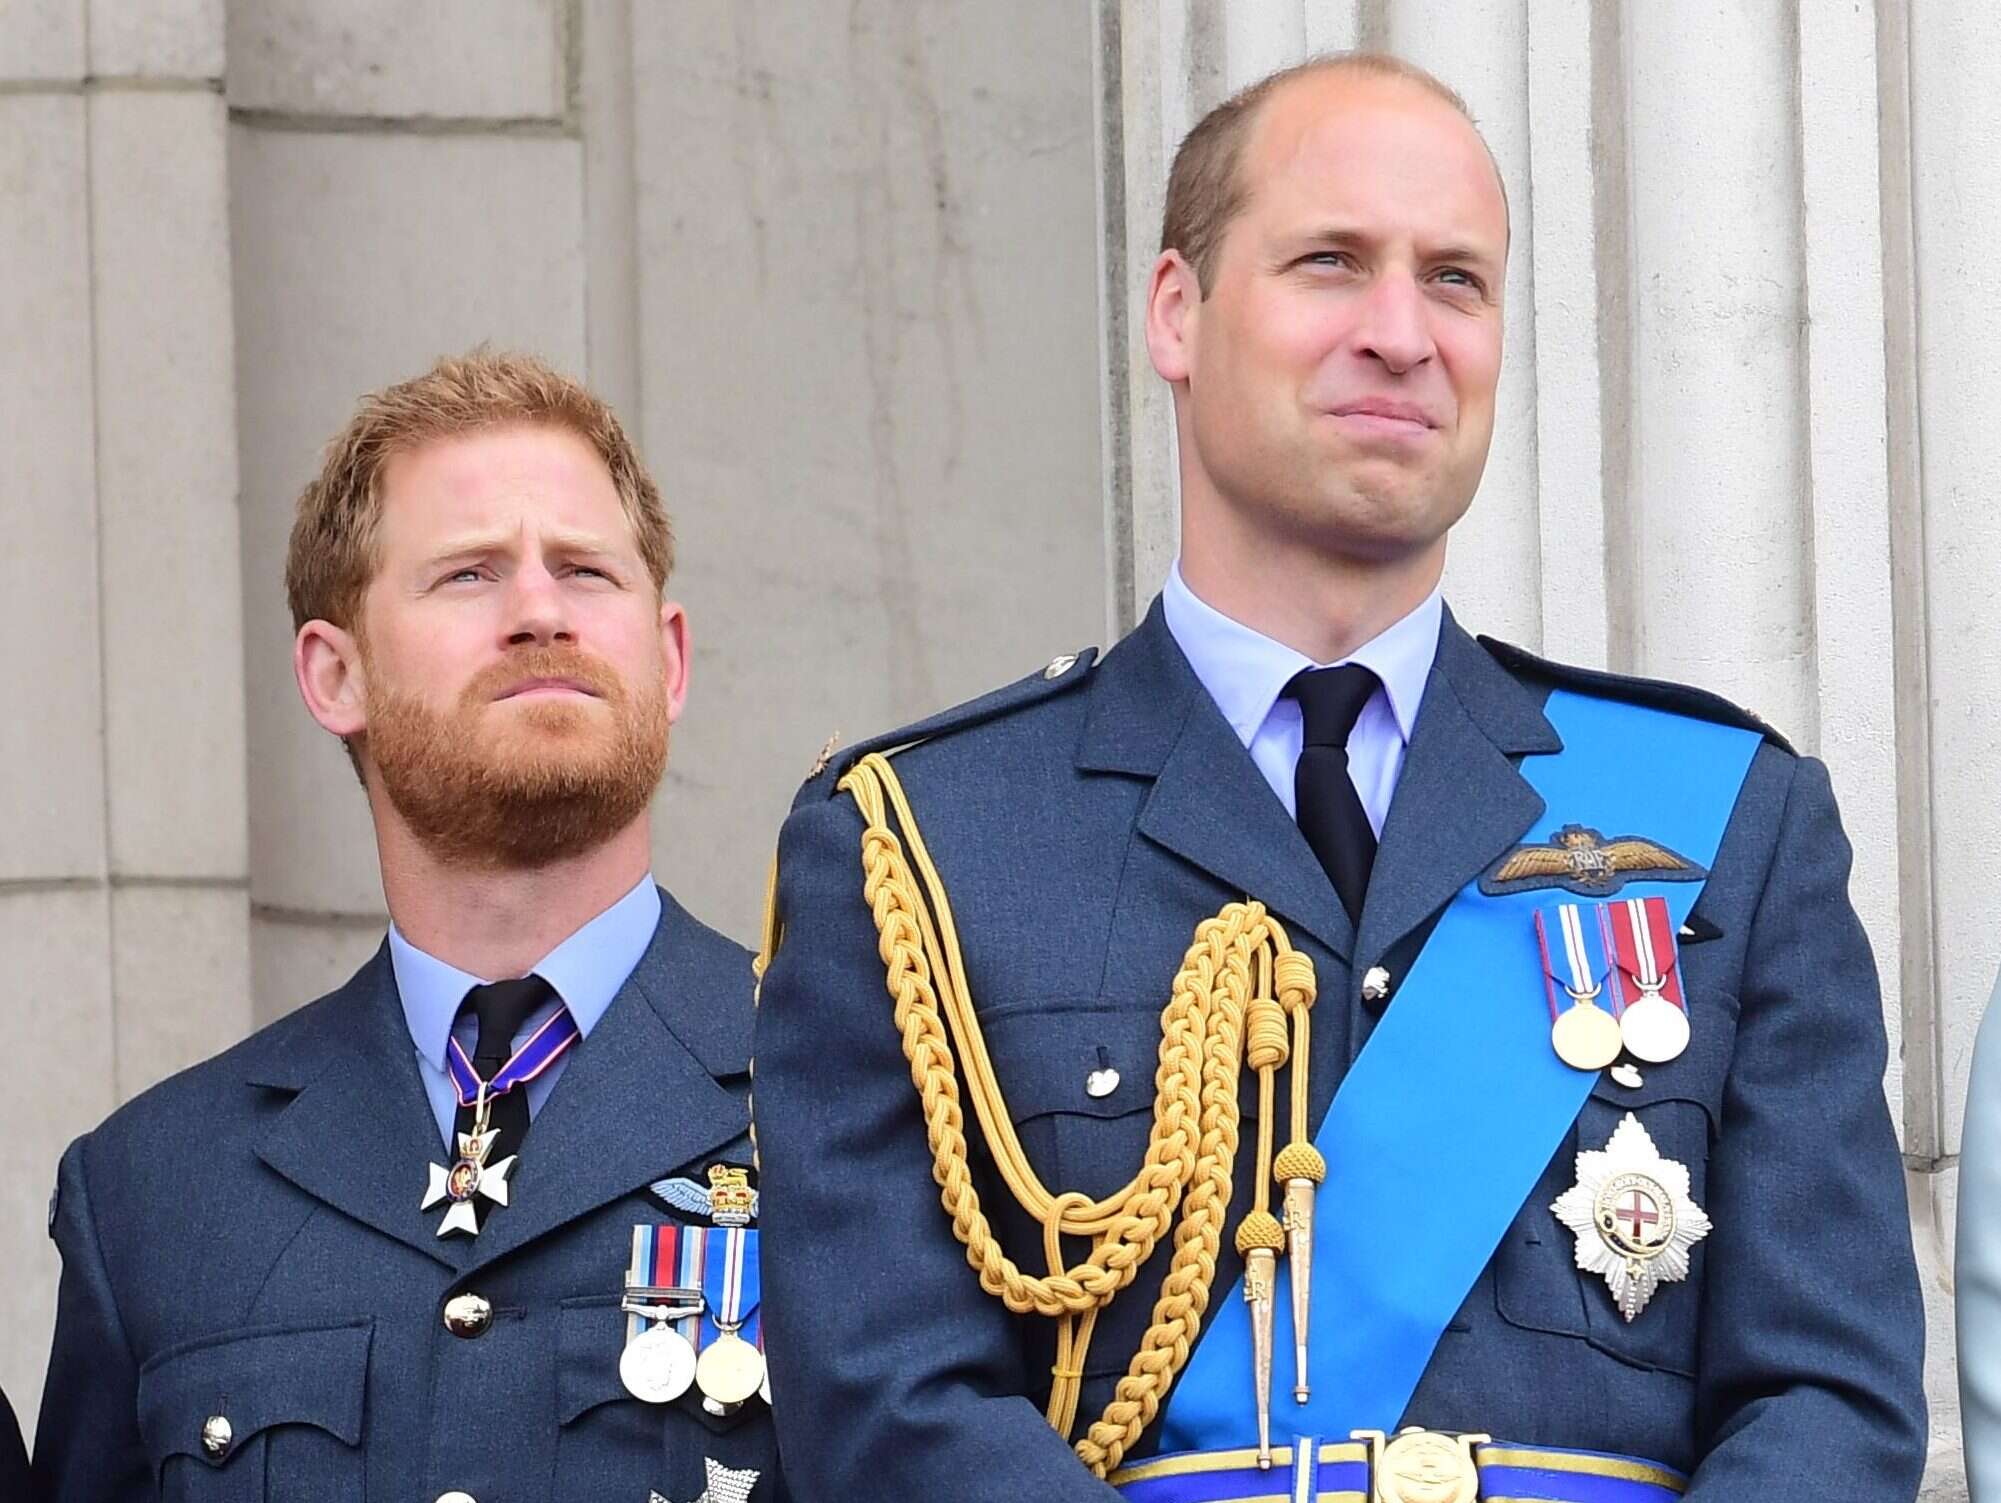 Princes William and Harry label royal rift story 'false' and 'offensive'